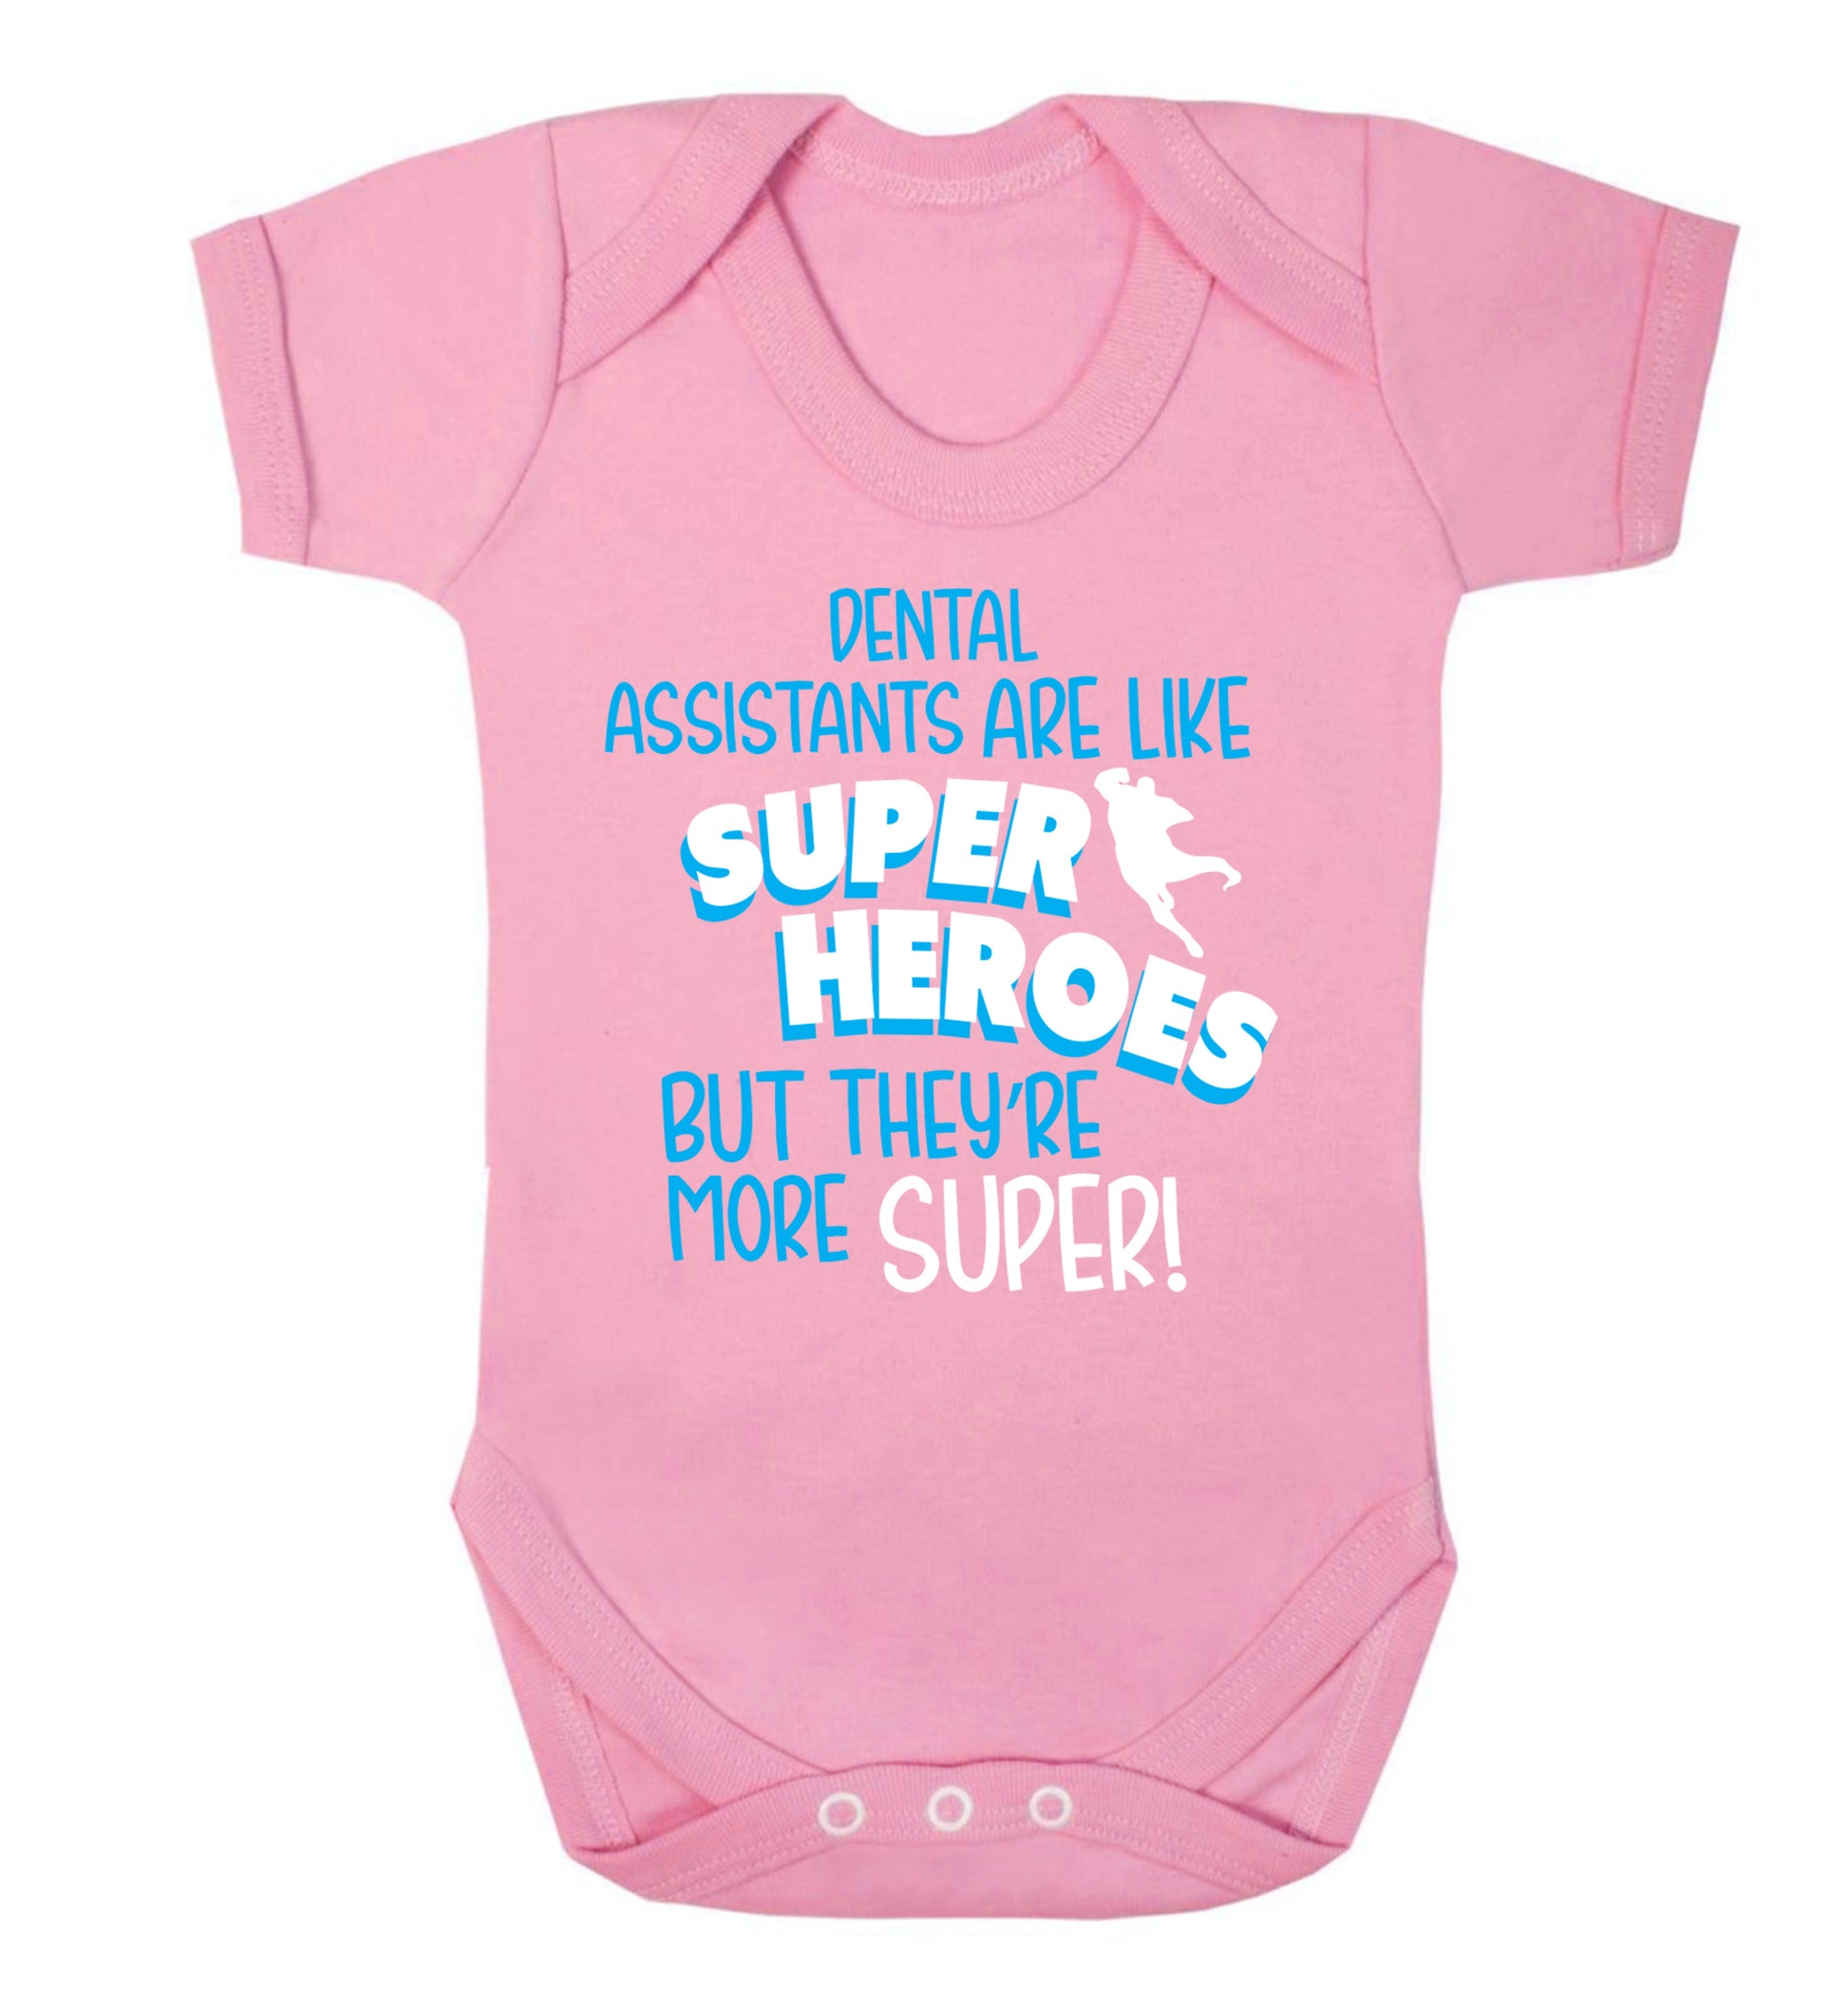 Dental Assistants are like superheros but they're more super Baby Vest pale pink 18-24 months